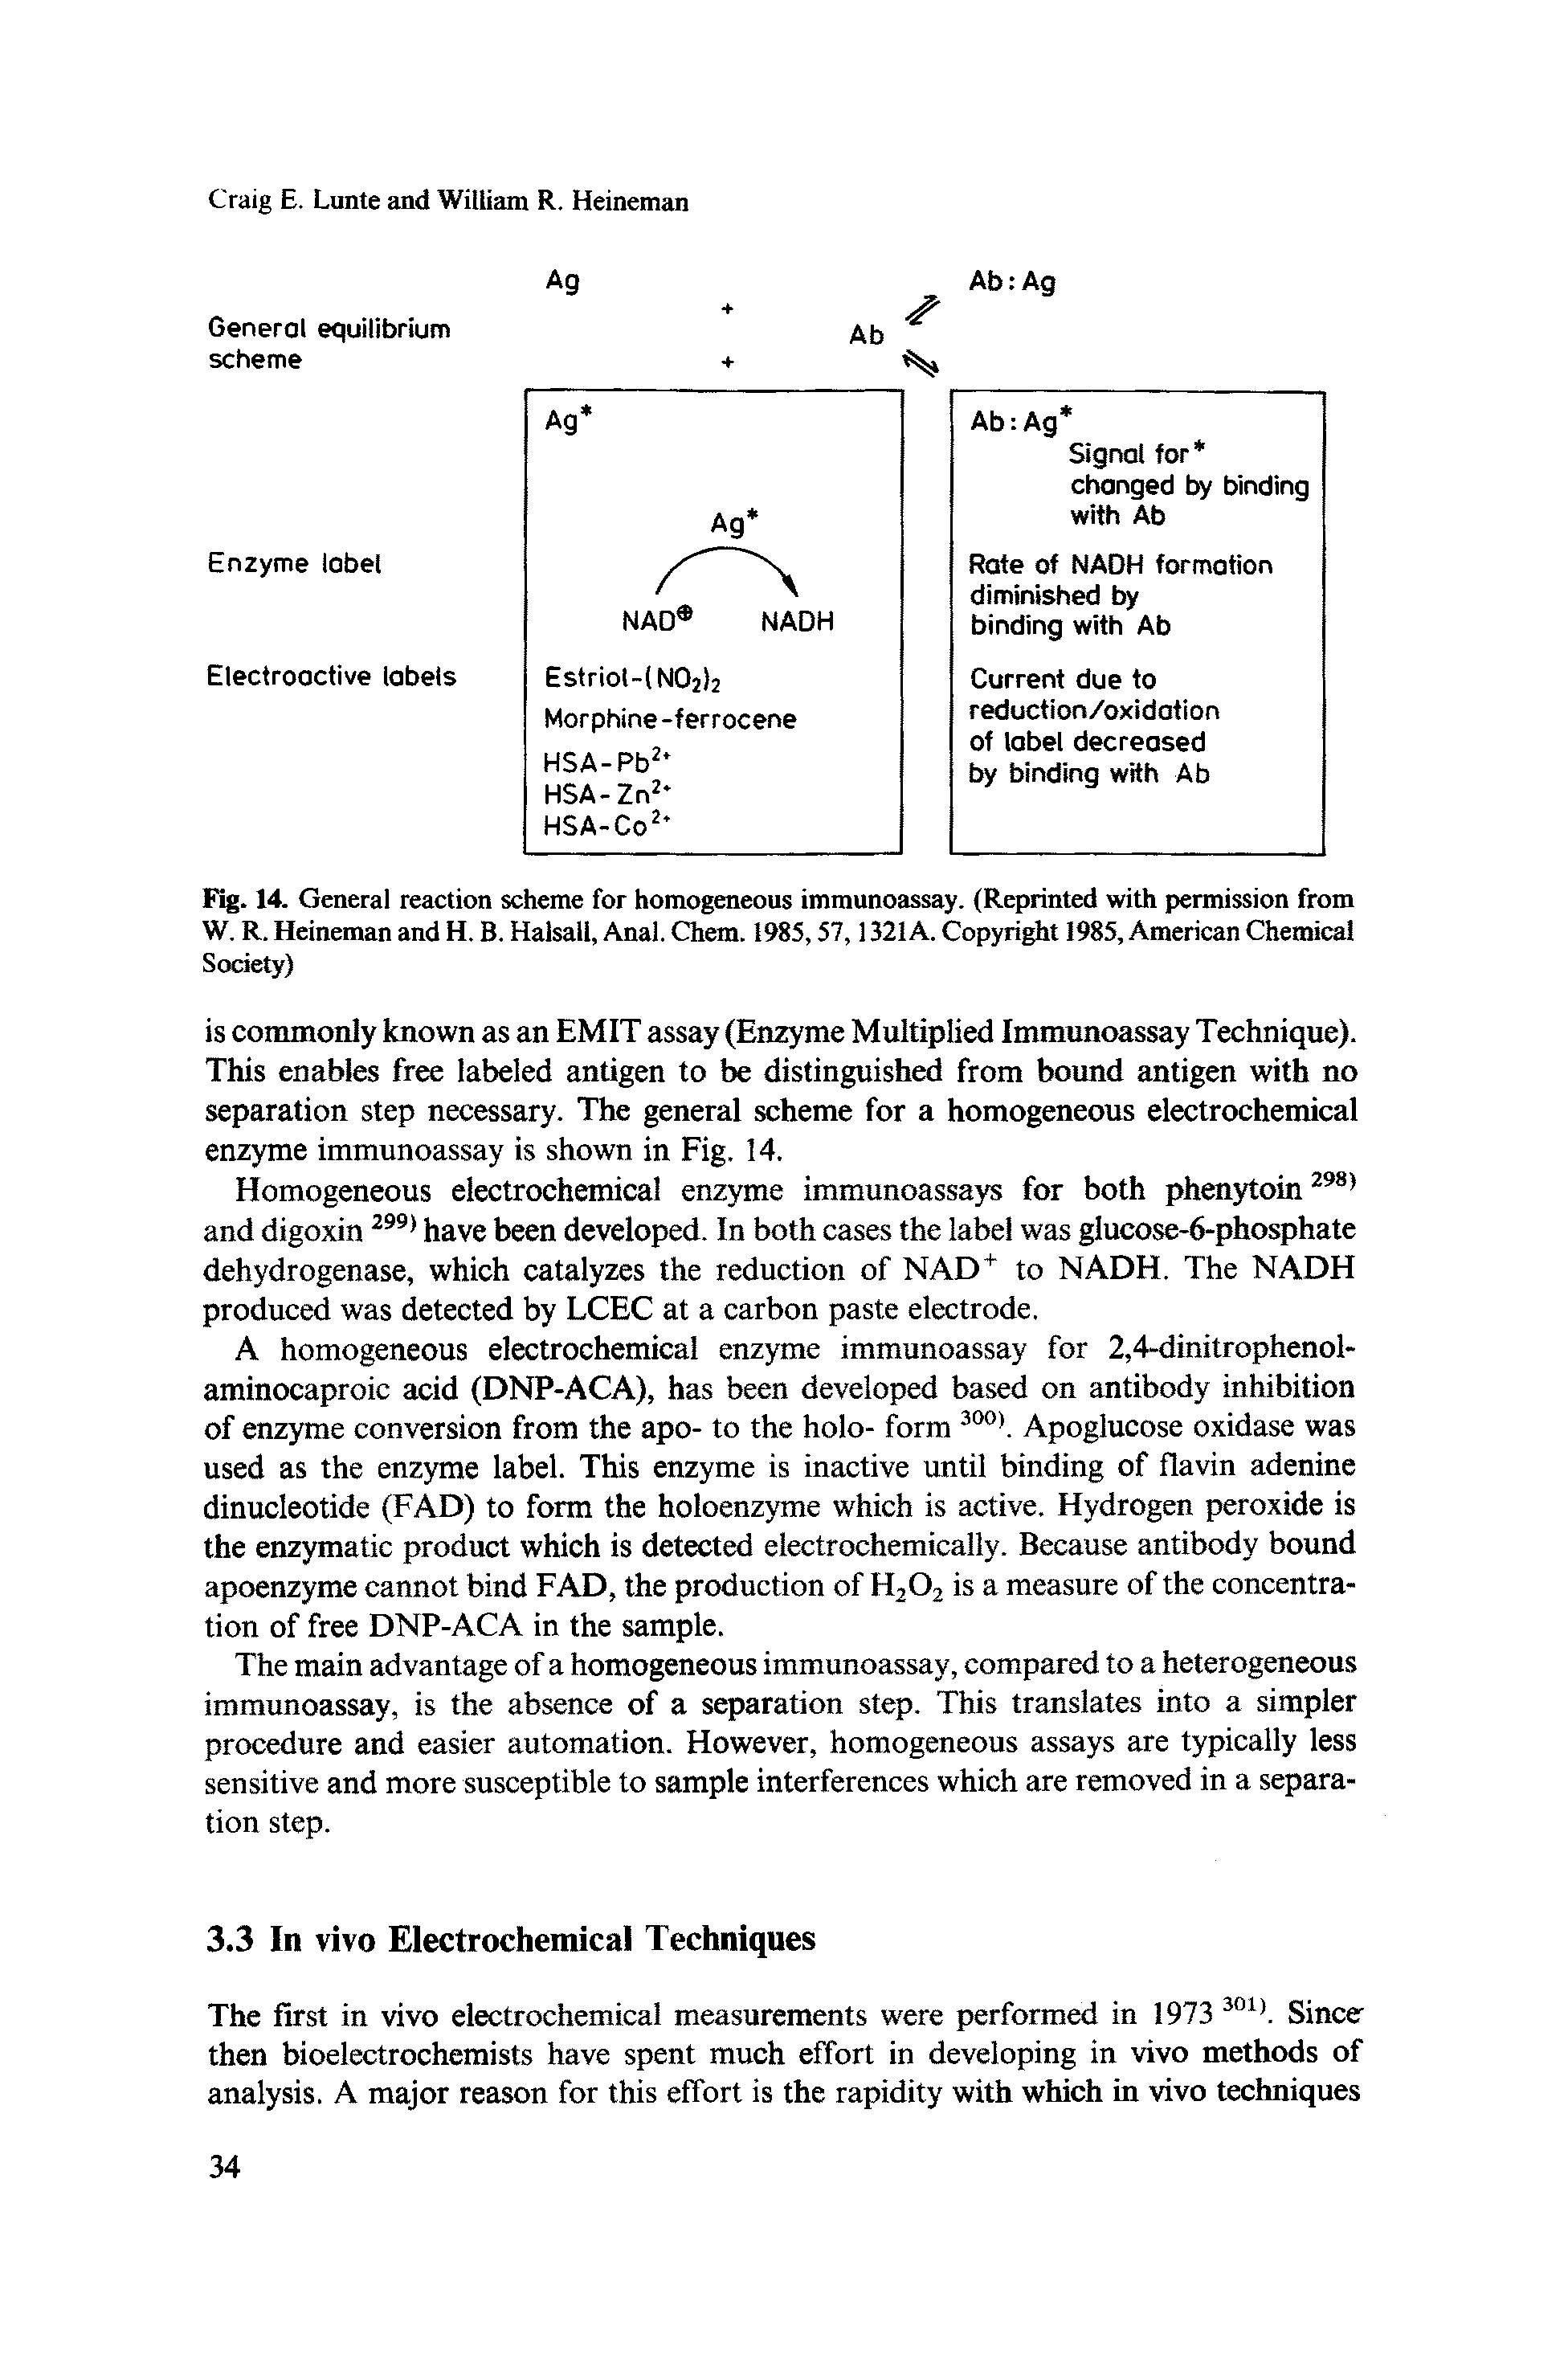 Fig. 14. General reaction scheme for homogeneous immunoassay. (Reprinted with permission from W. R. Heineman and H. B. Halsall, Anal. Chem. 1985,57,1321A. Copyright 1985, American Chemical Society)...